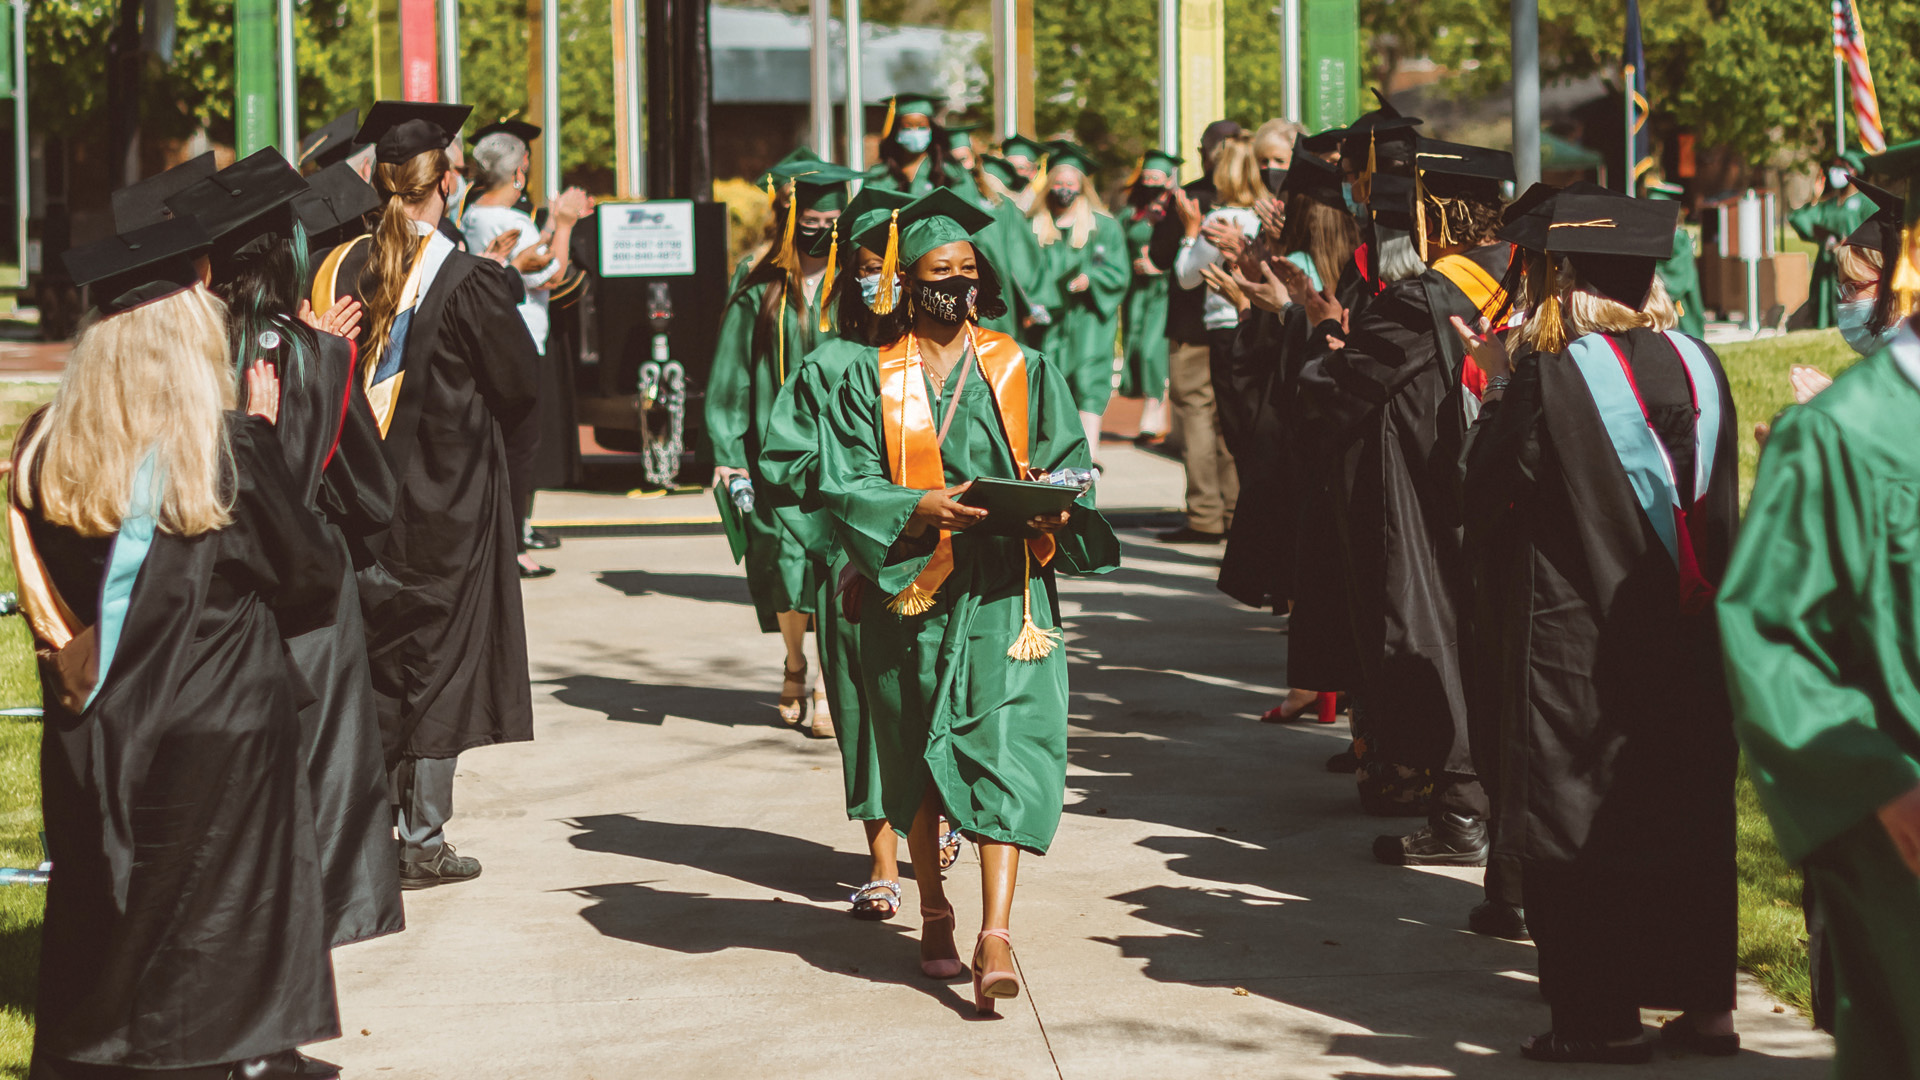 Graduates exiting the commencement ceremony